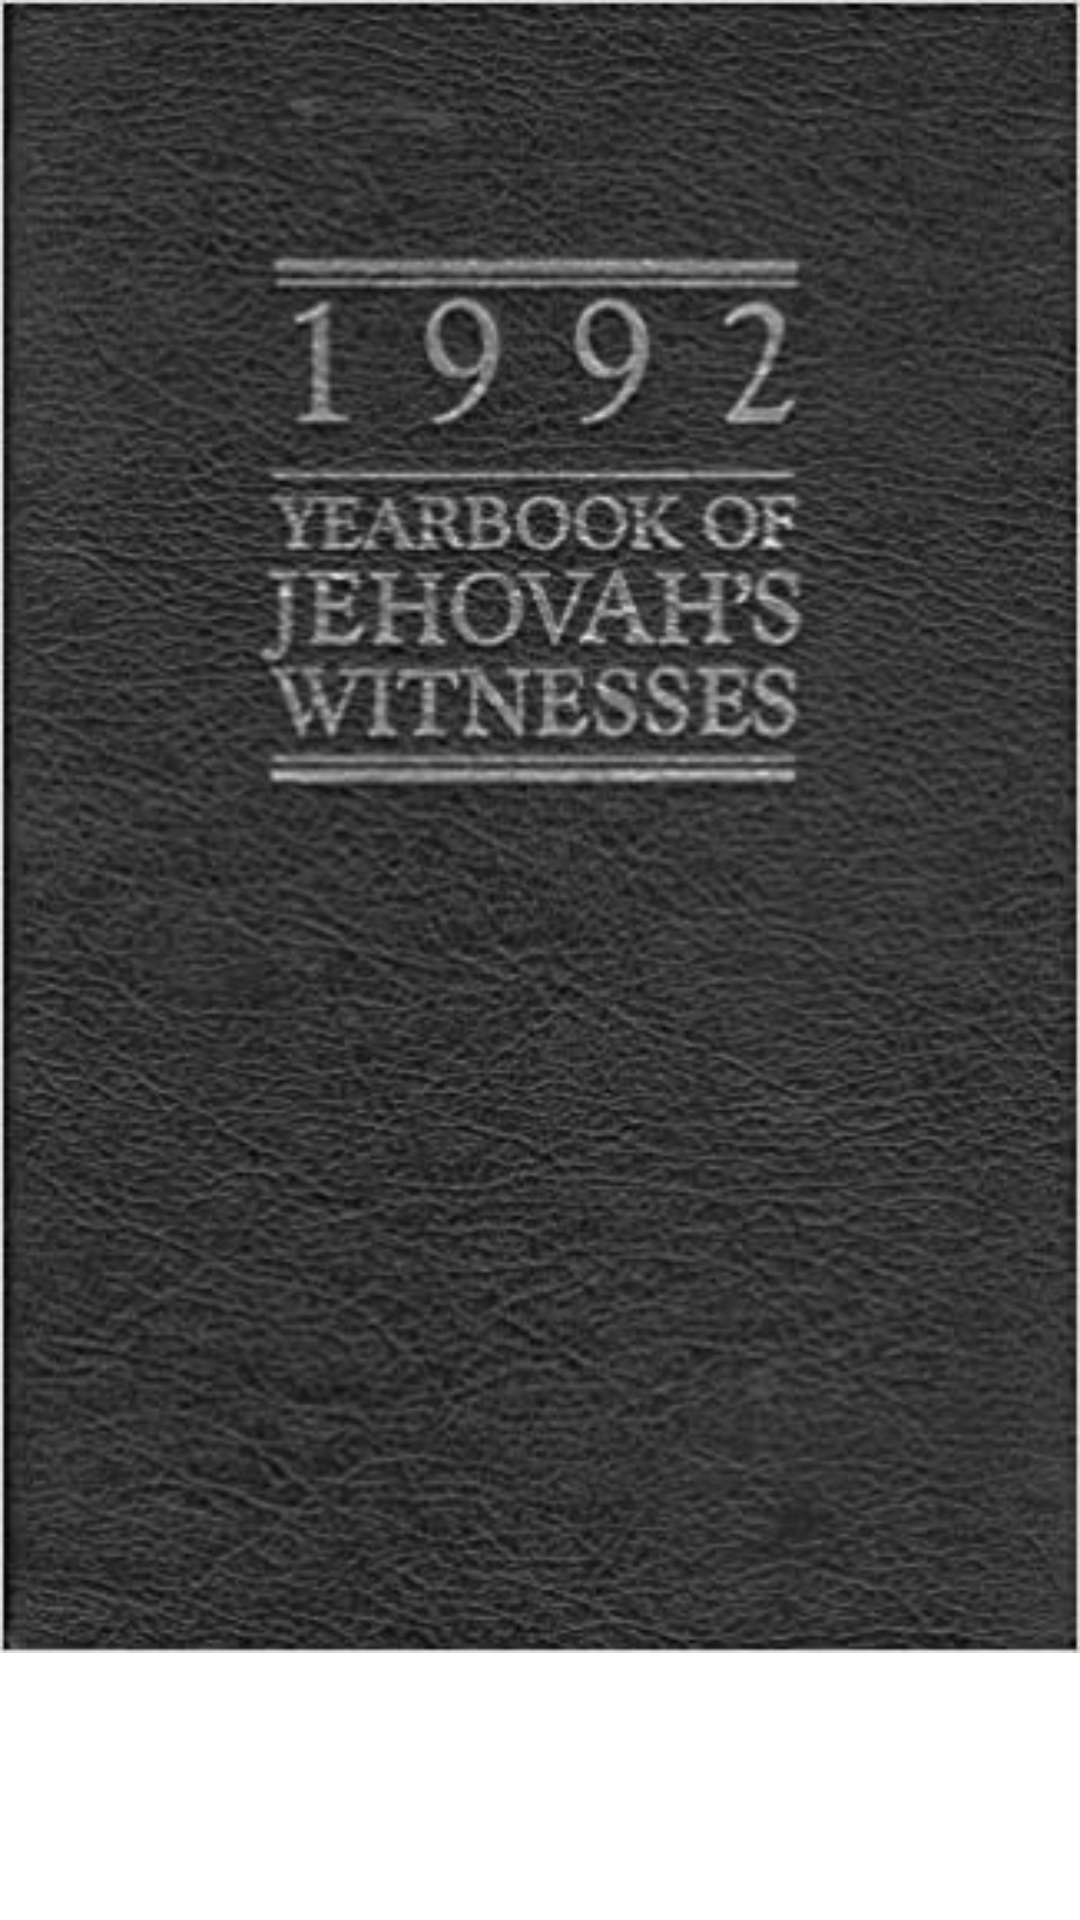 1992 Yearbook of Jehovah's Witnesses